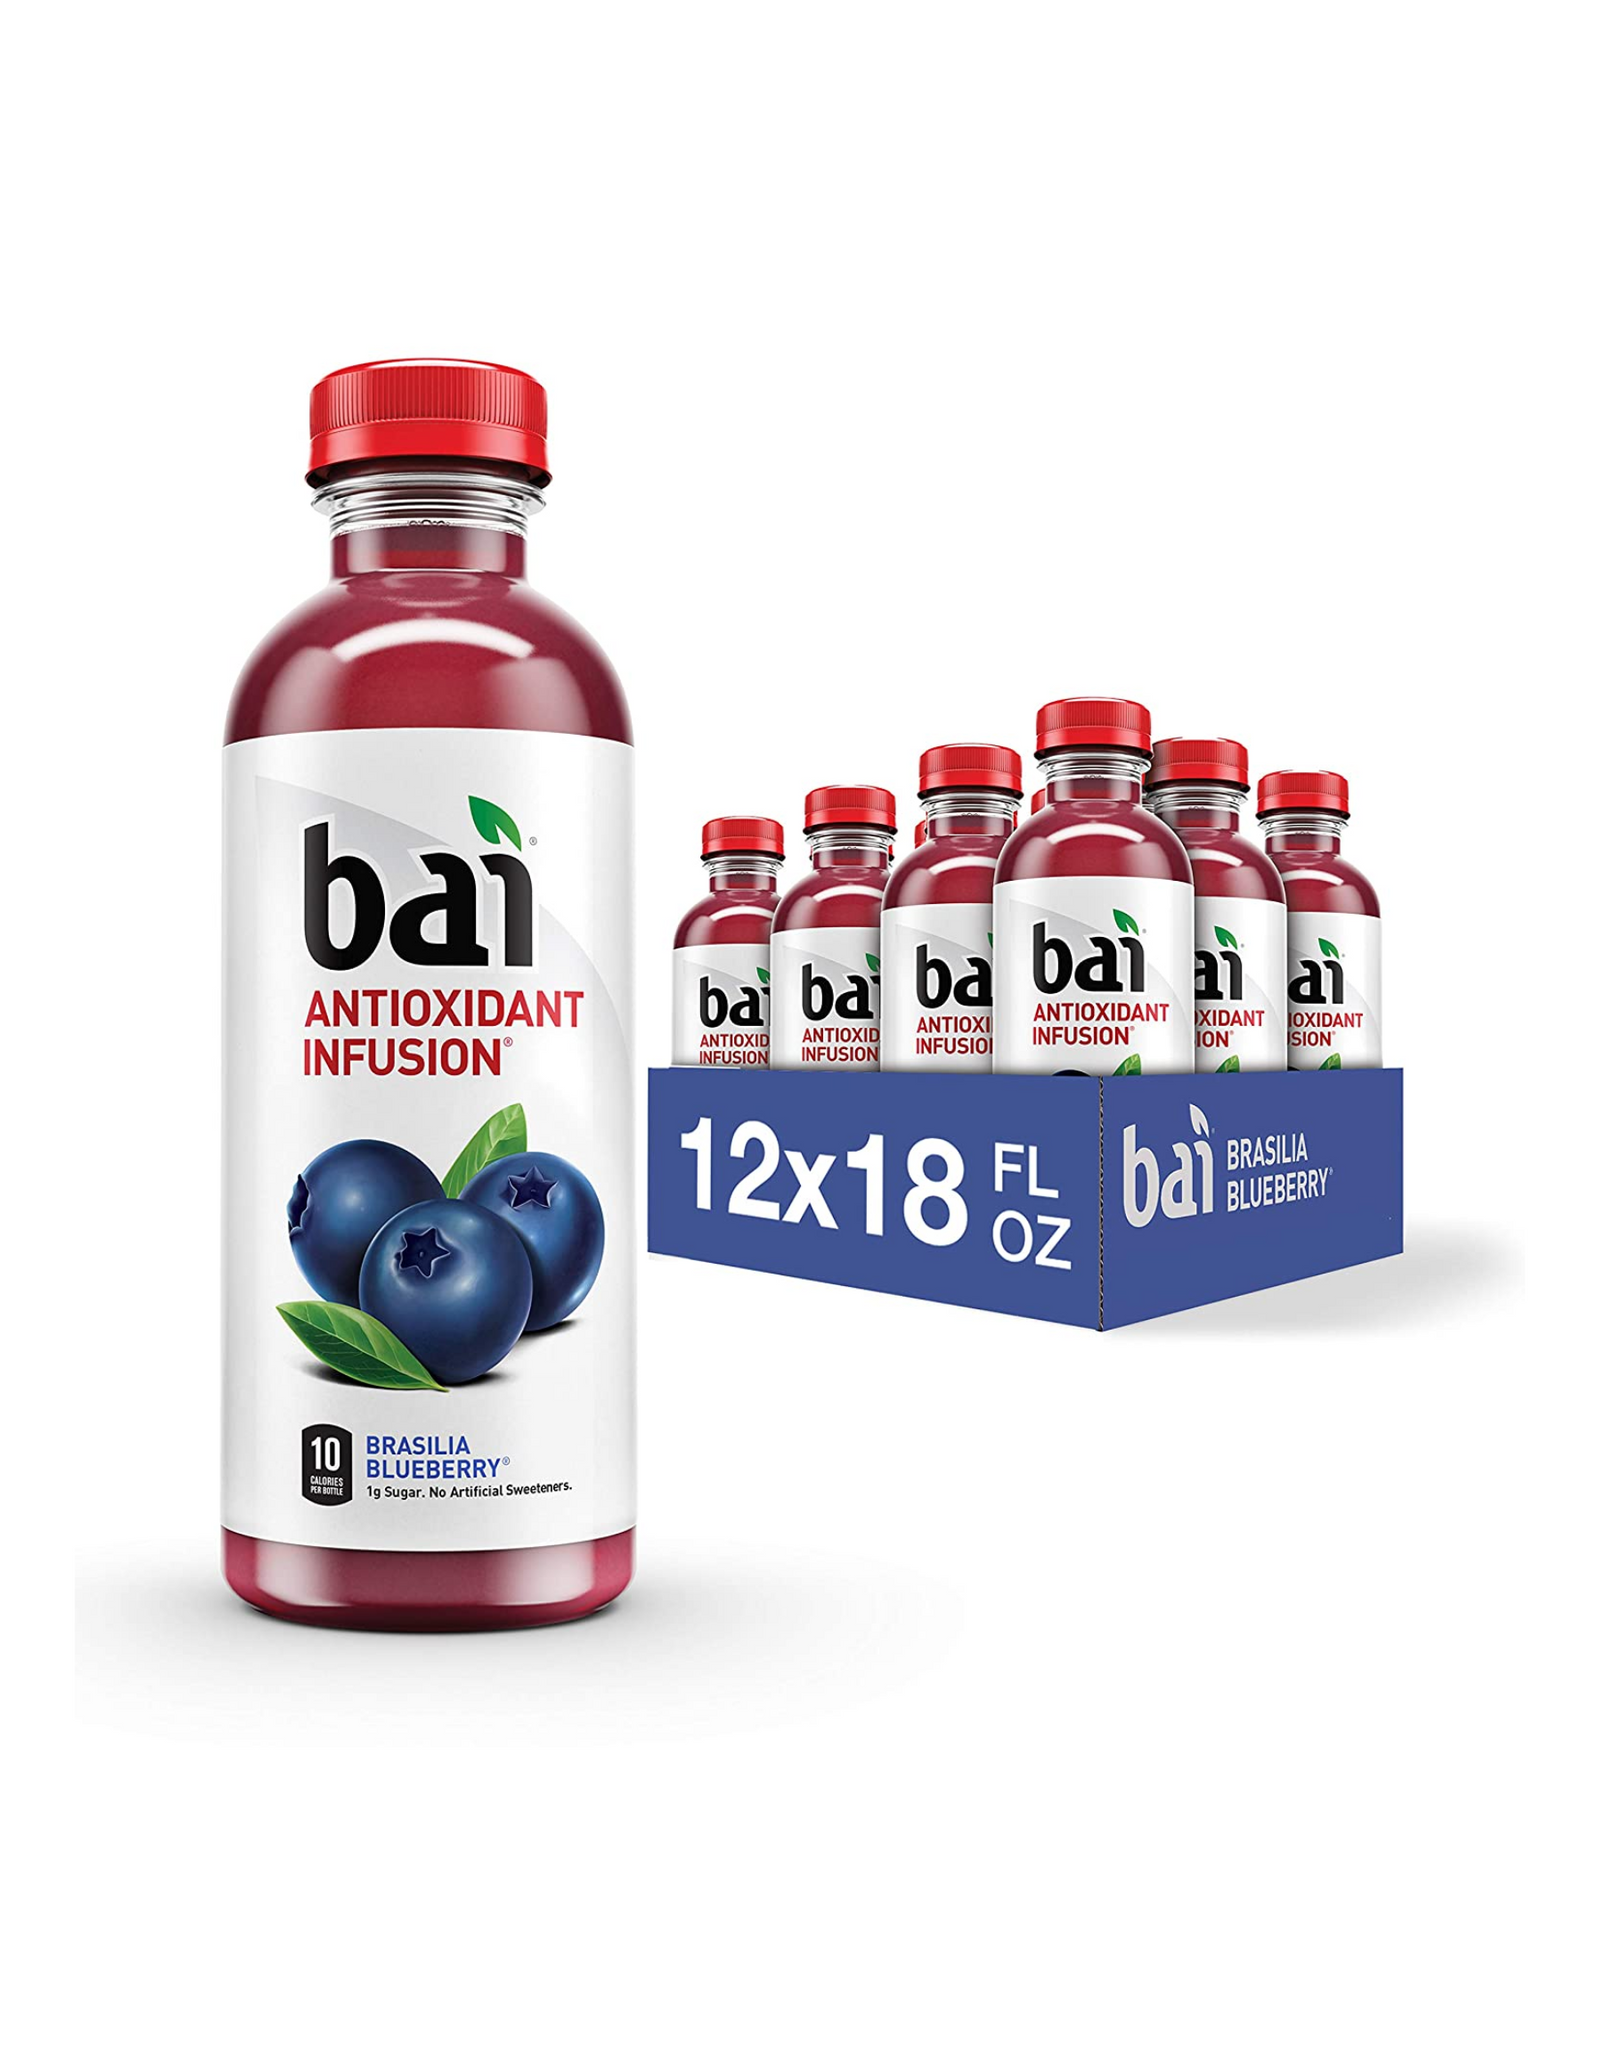 Bai Flavored Water, Antioxidant Infused Drinks, Brasilia Blueberry, 18 fl oz (Pack of 12)